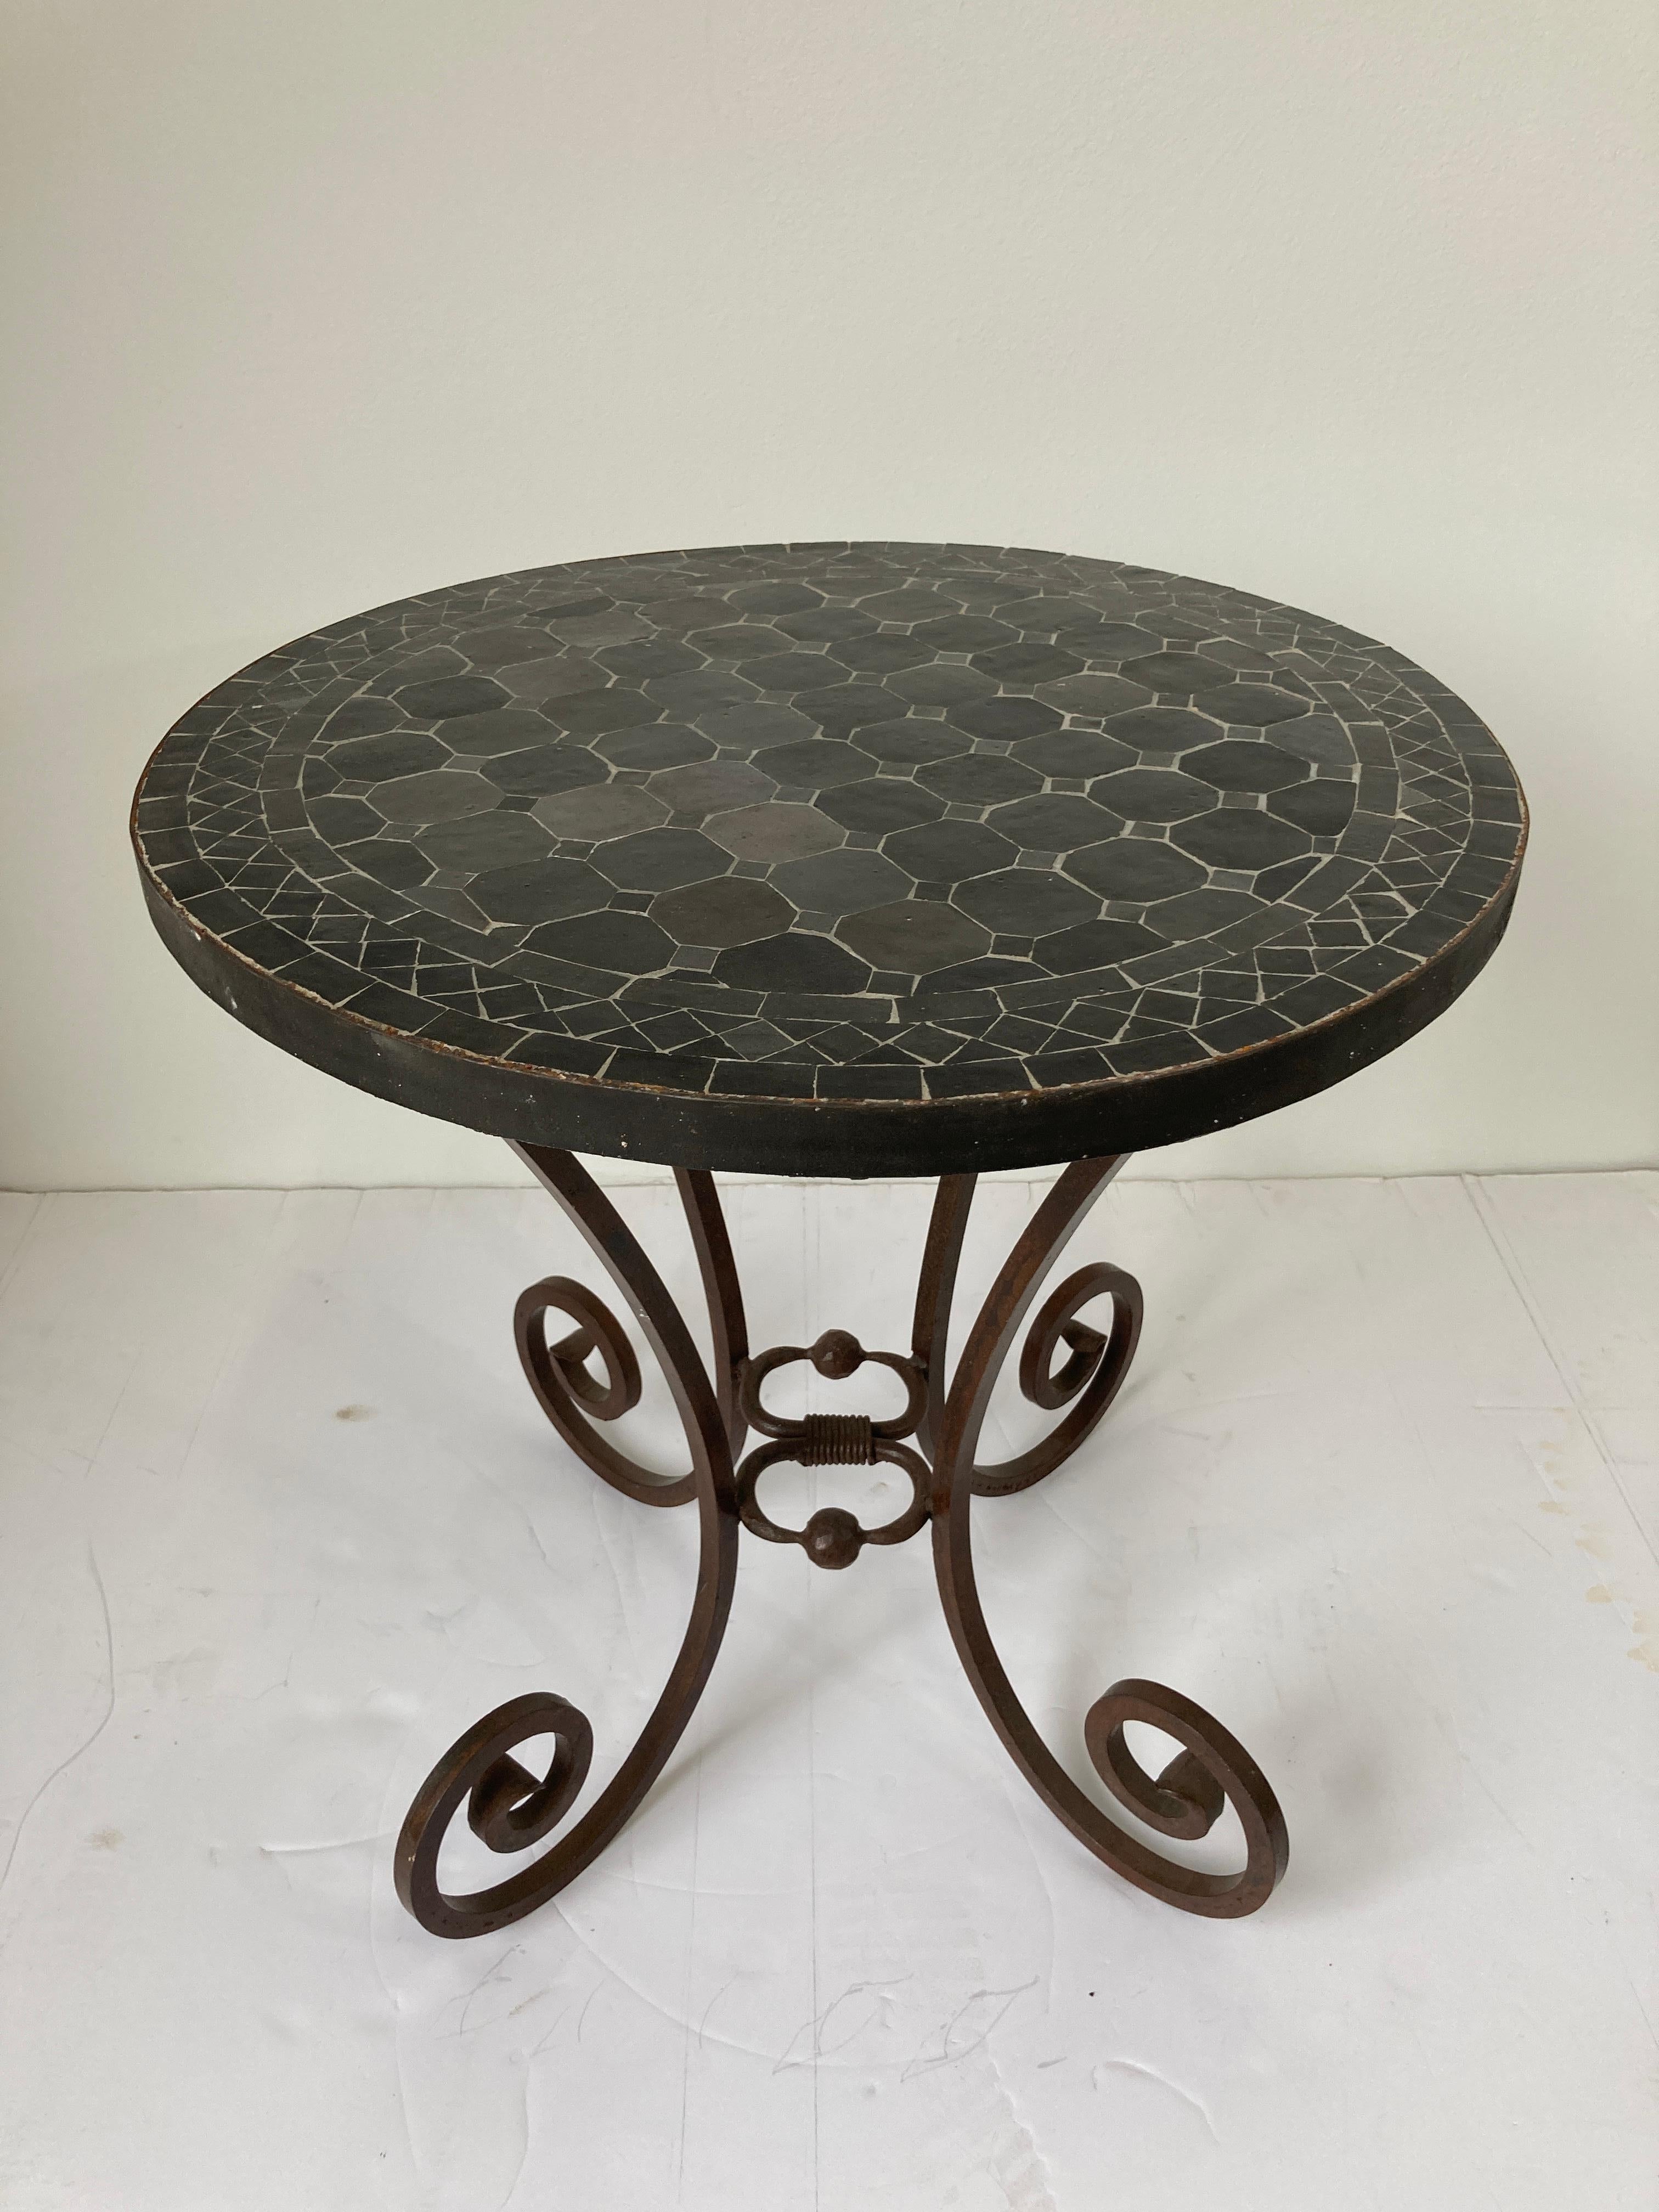 Moroccan mosaic bistro table on iron base in oxidized black tiles.
Patio tile tables handmade by expert artisans in Fez, Morocco using reclaimed old glazed black color tiles inlaid in concrete and making beautiful geometrical designs, colors are a